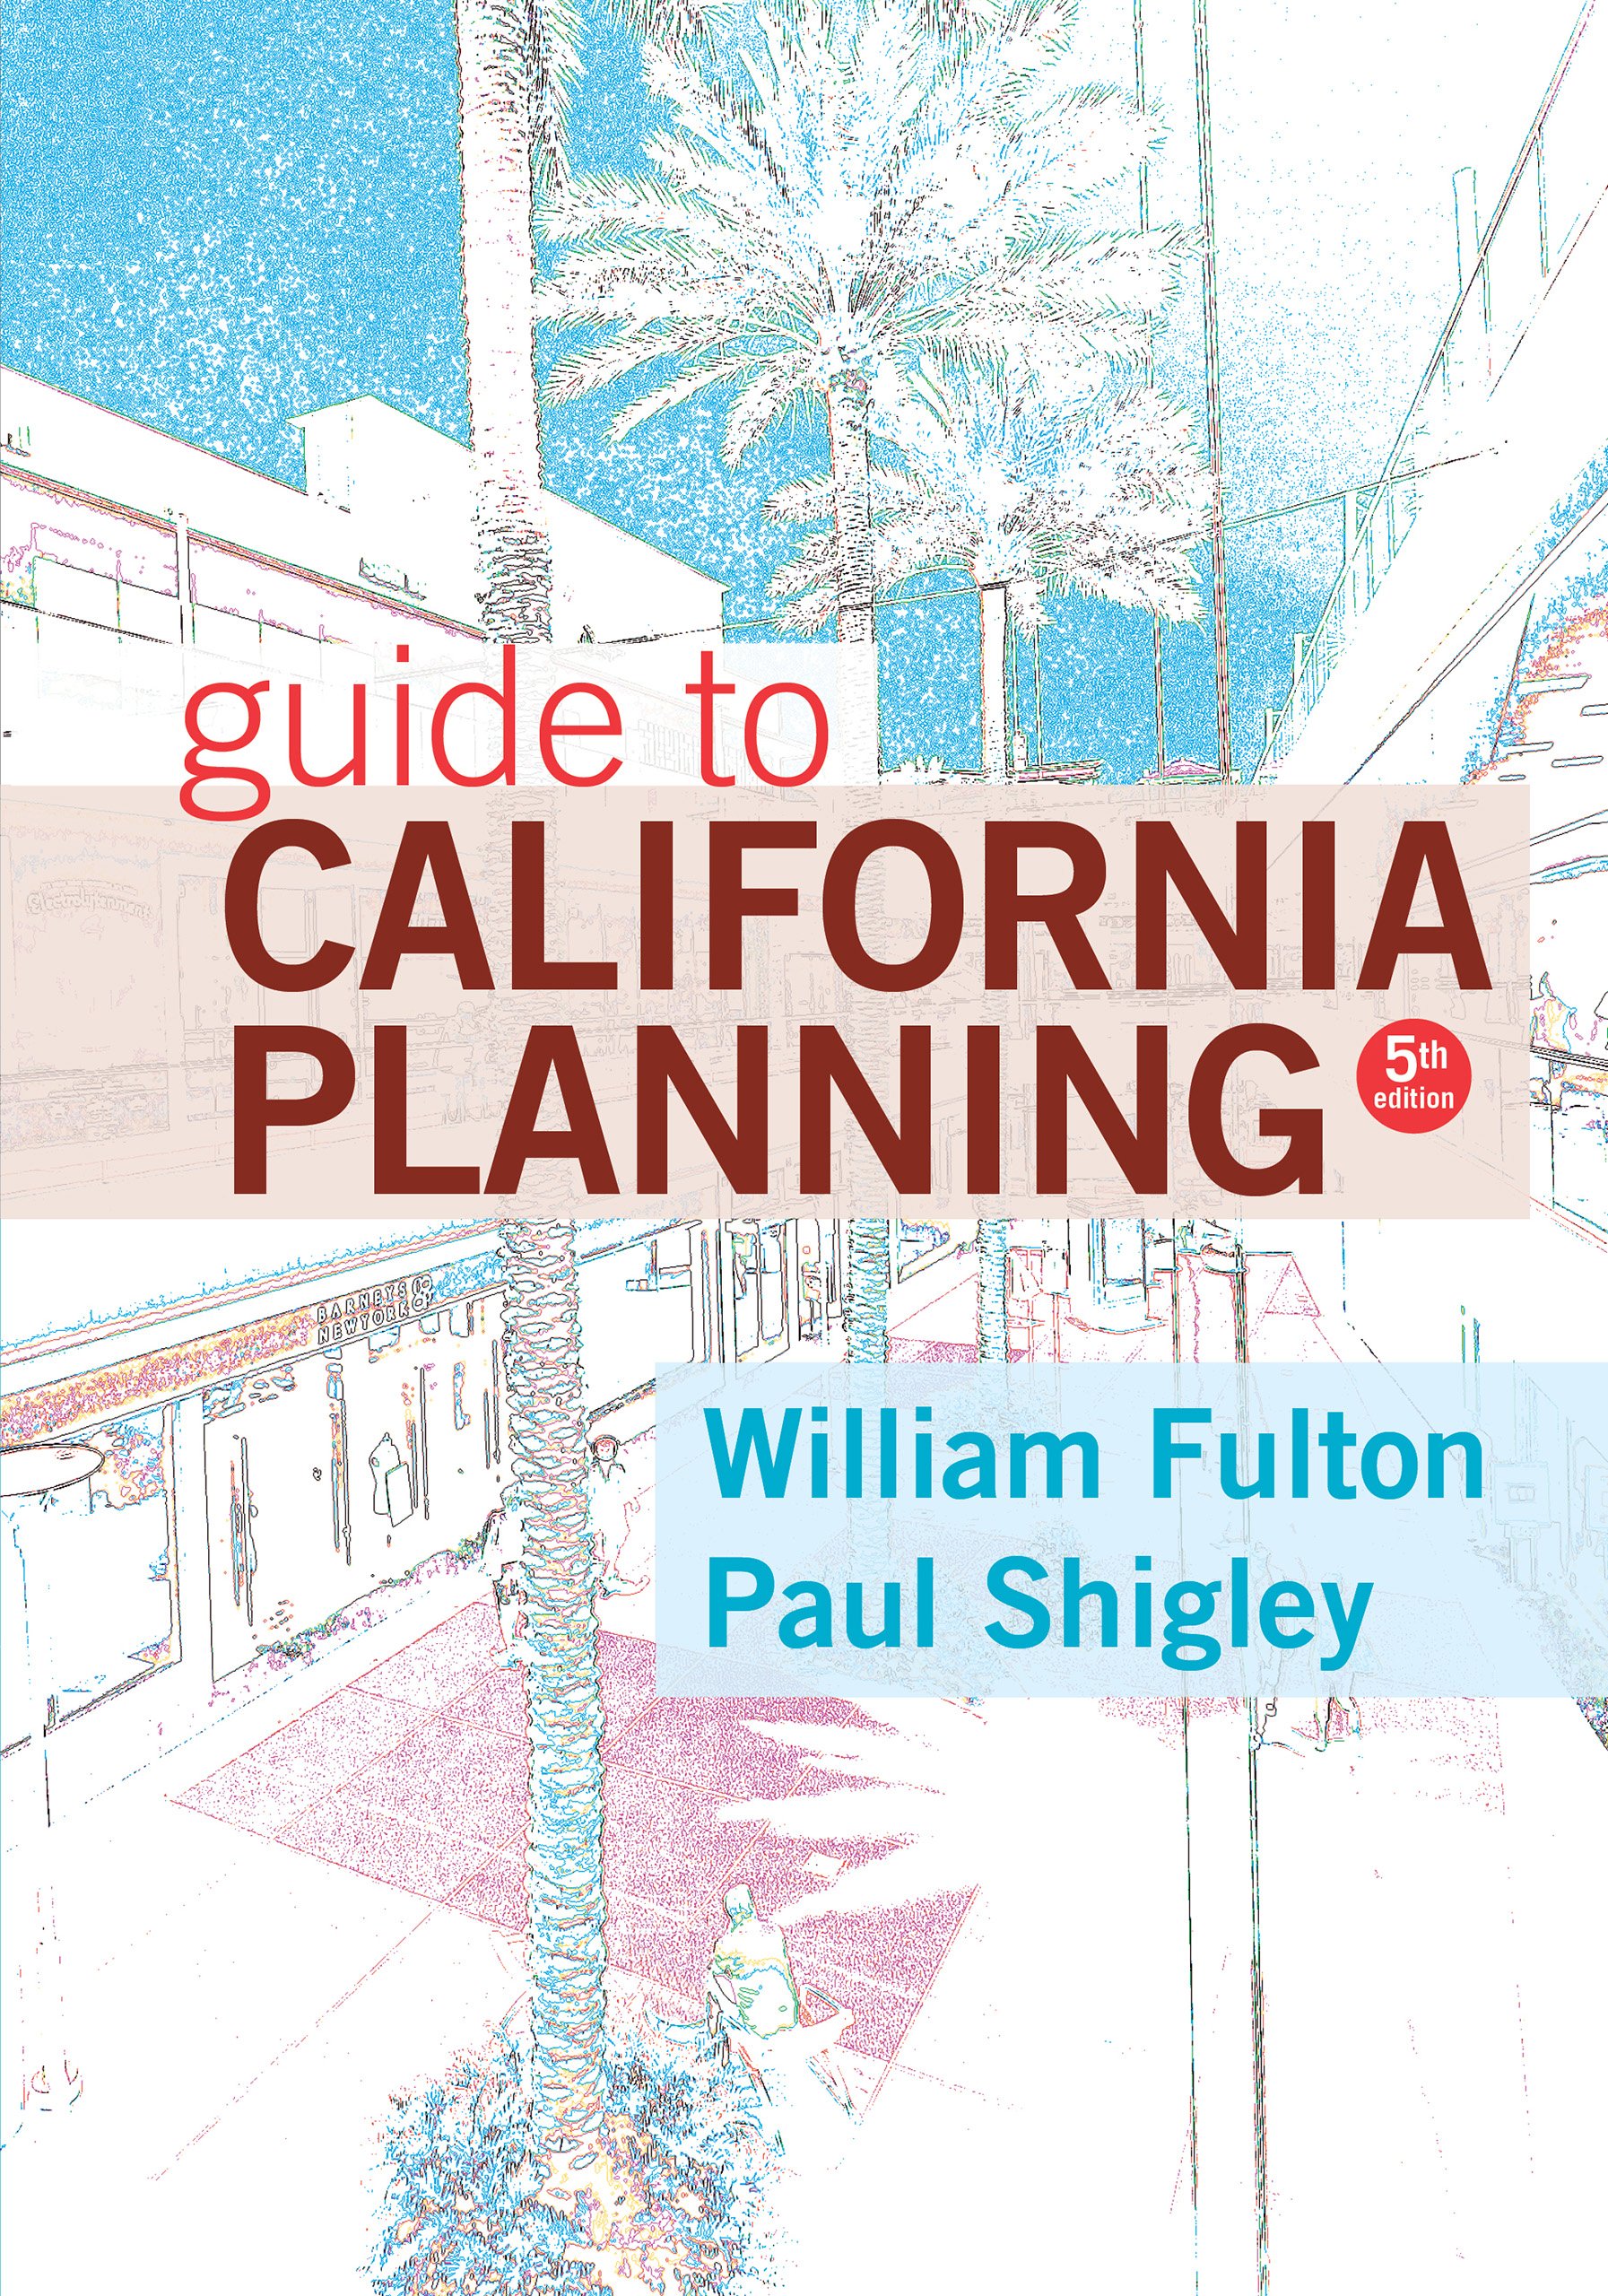 Guide to California Planning